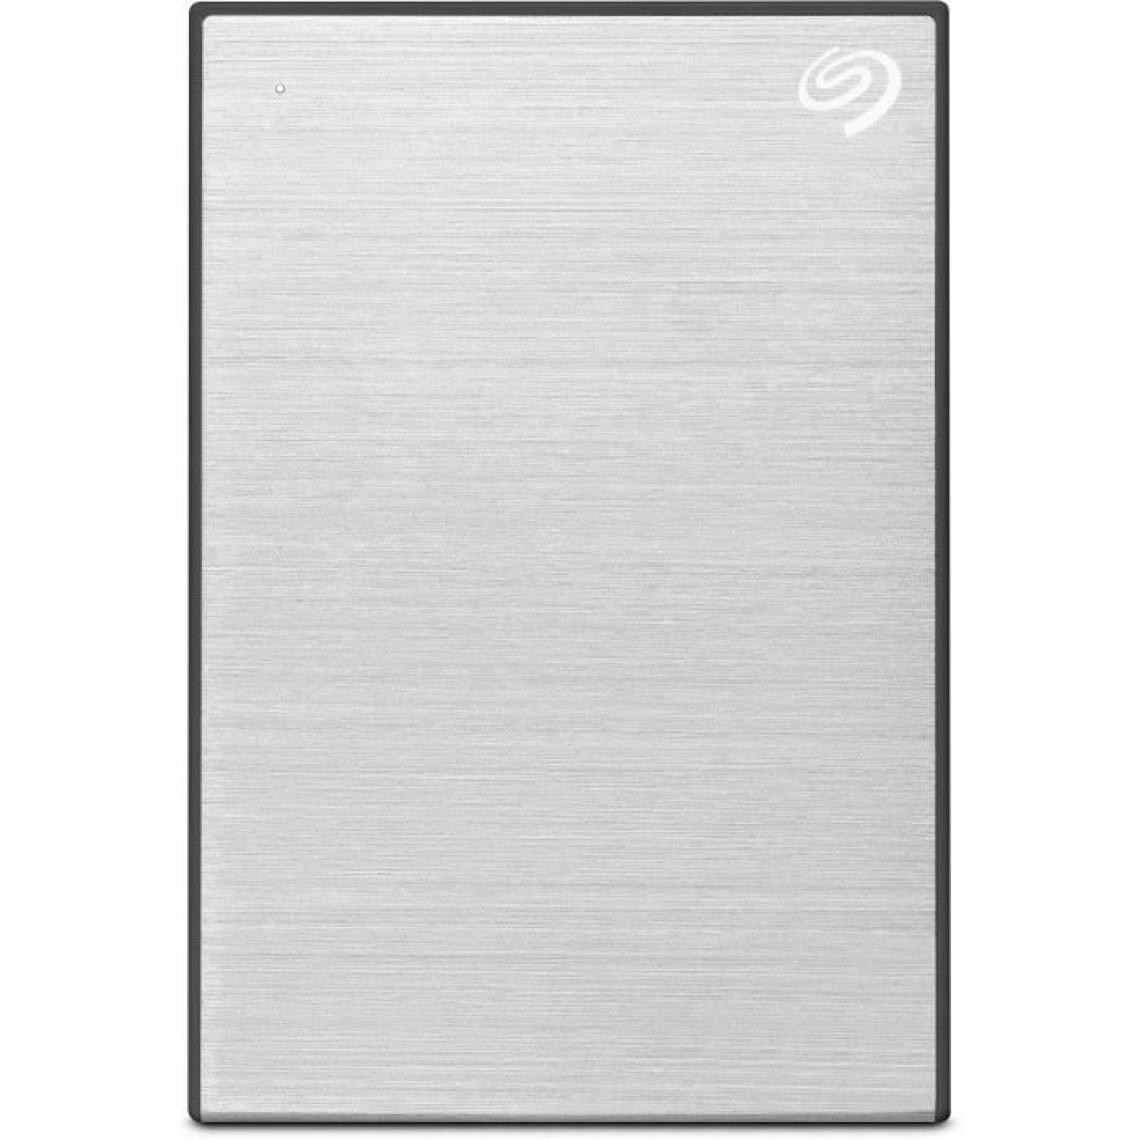 Seagate - SEAGATE - Disque Dur Externe - One Touch HDD - 5To - USB 3.0 - Gris (STKC5000401) - Disque Dur interne